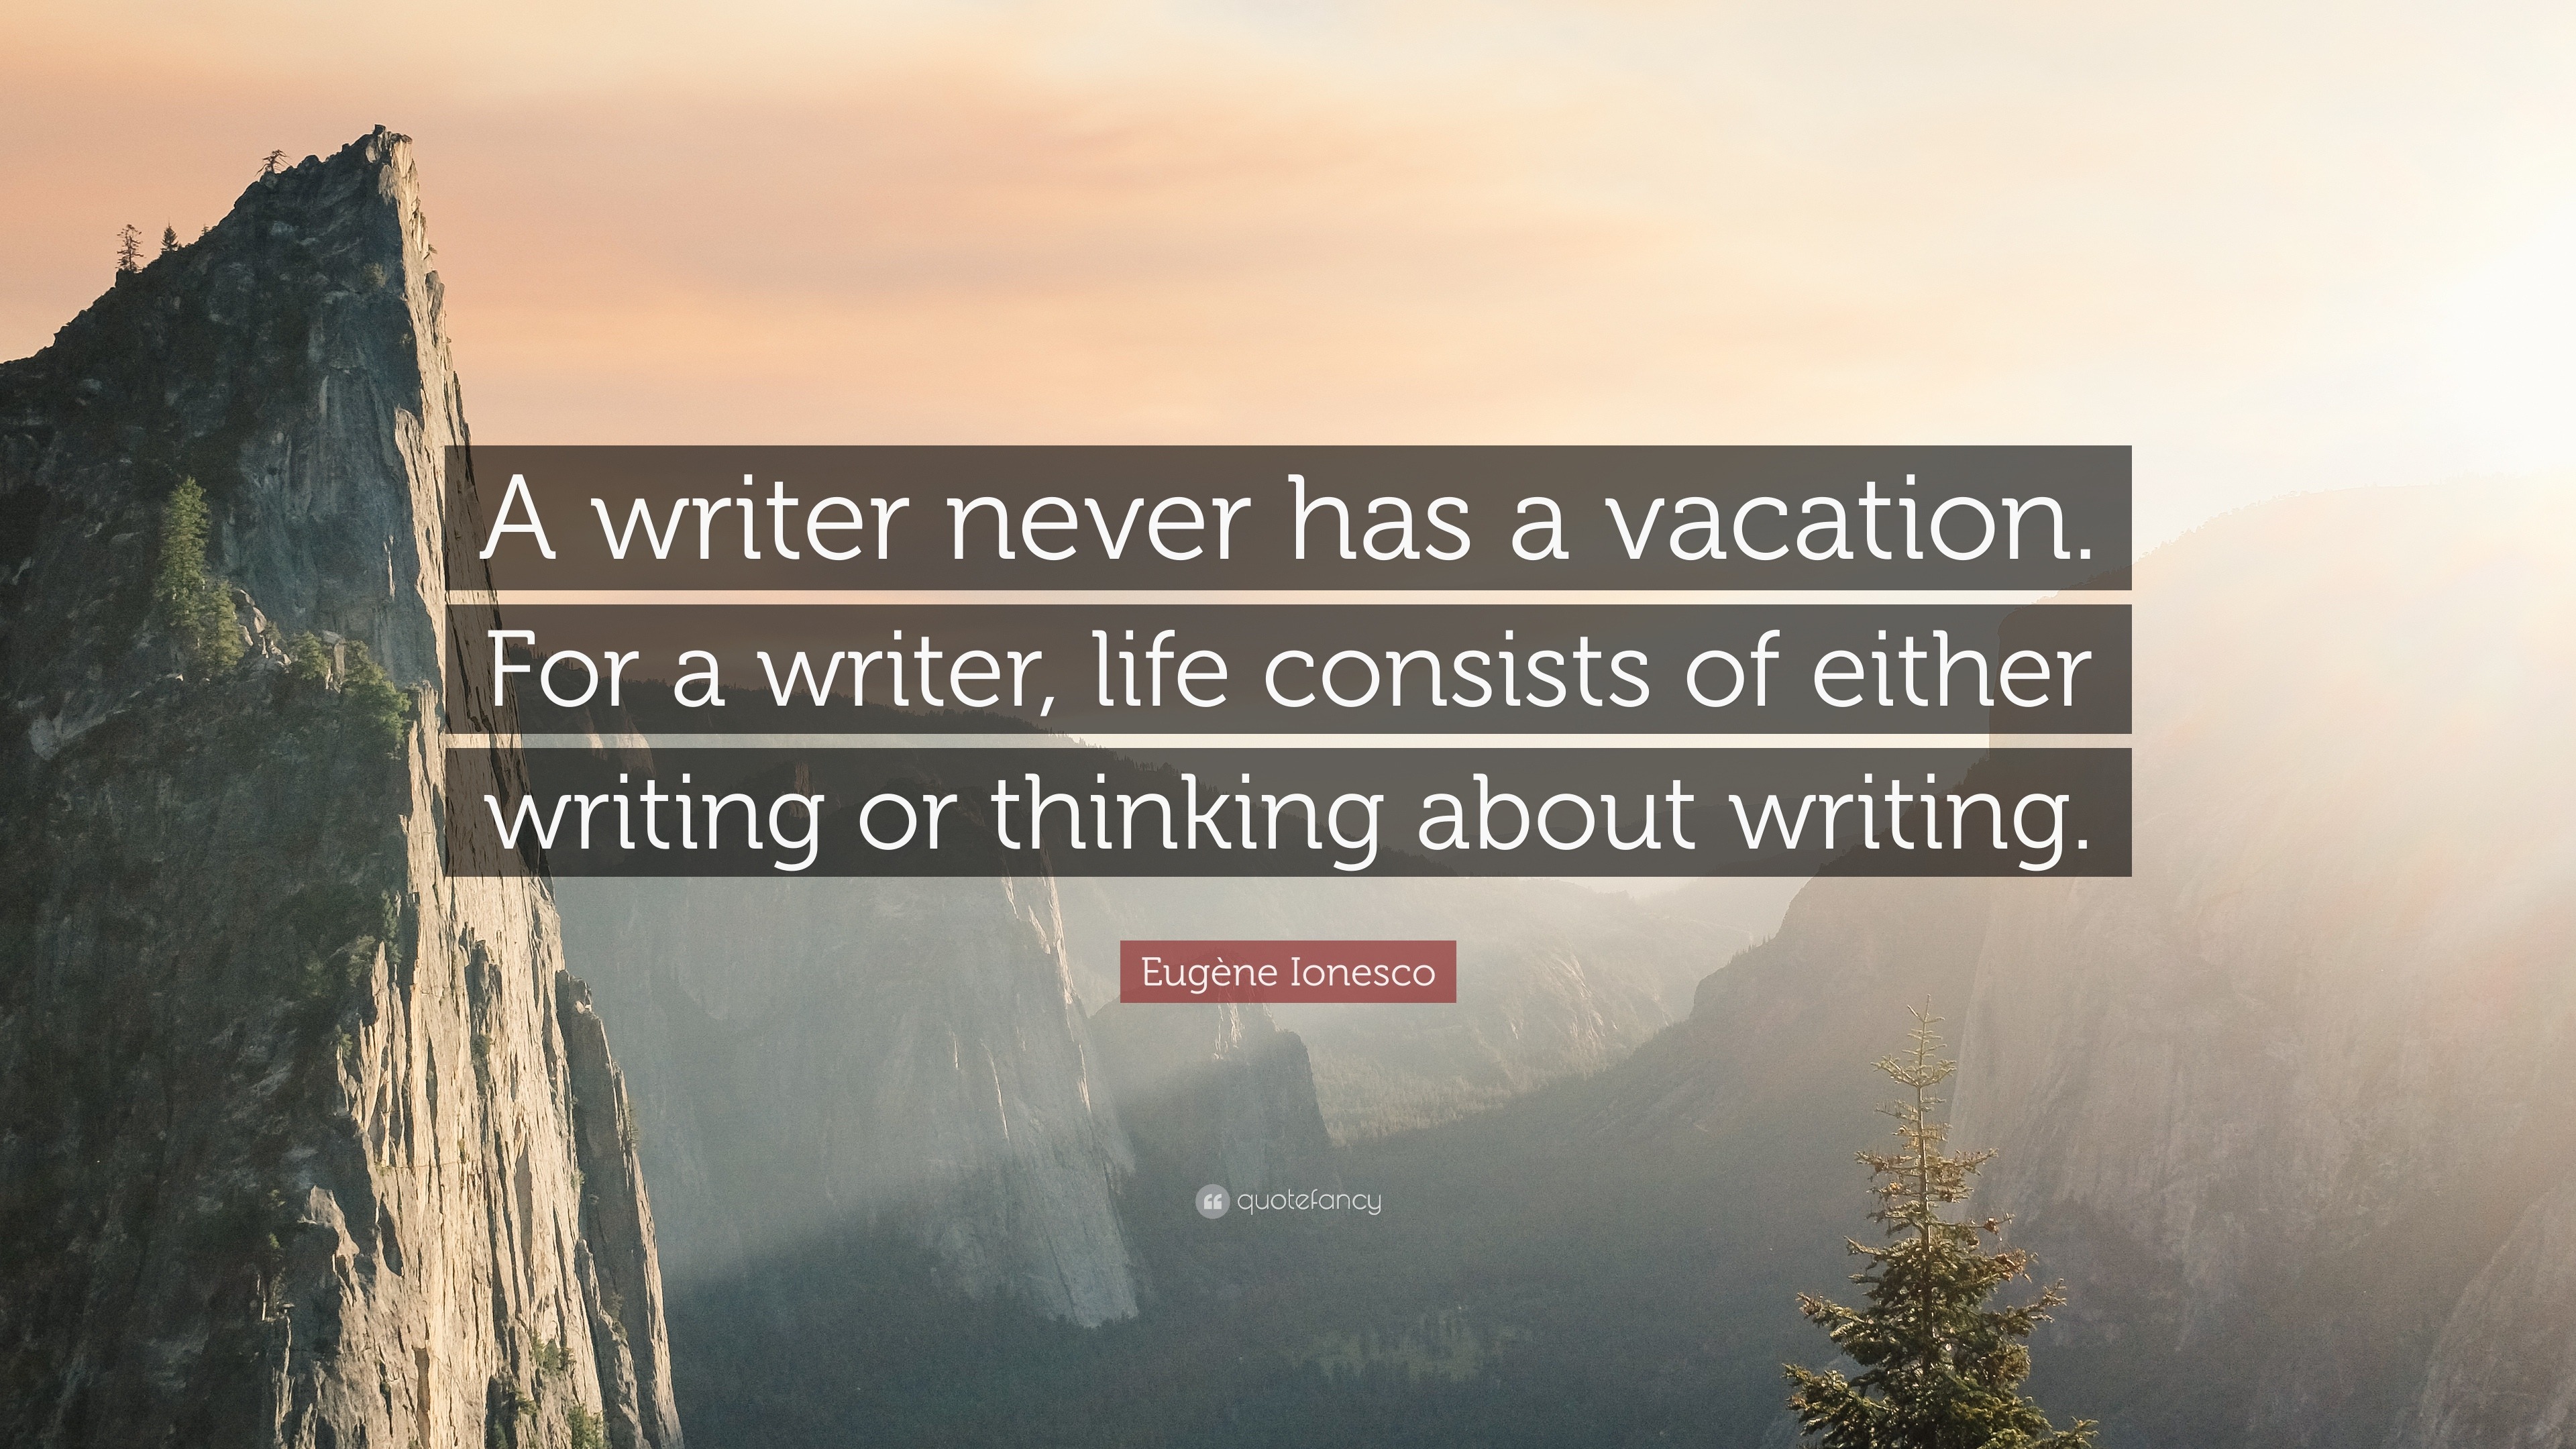 quotes about writing and life